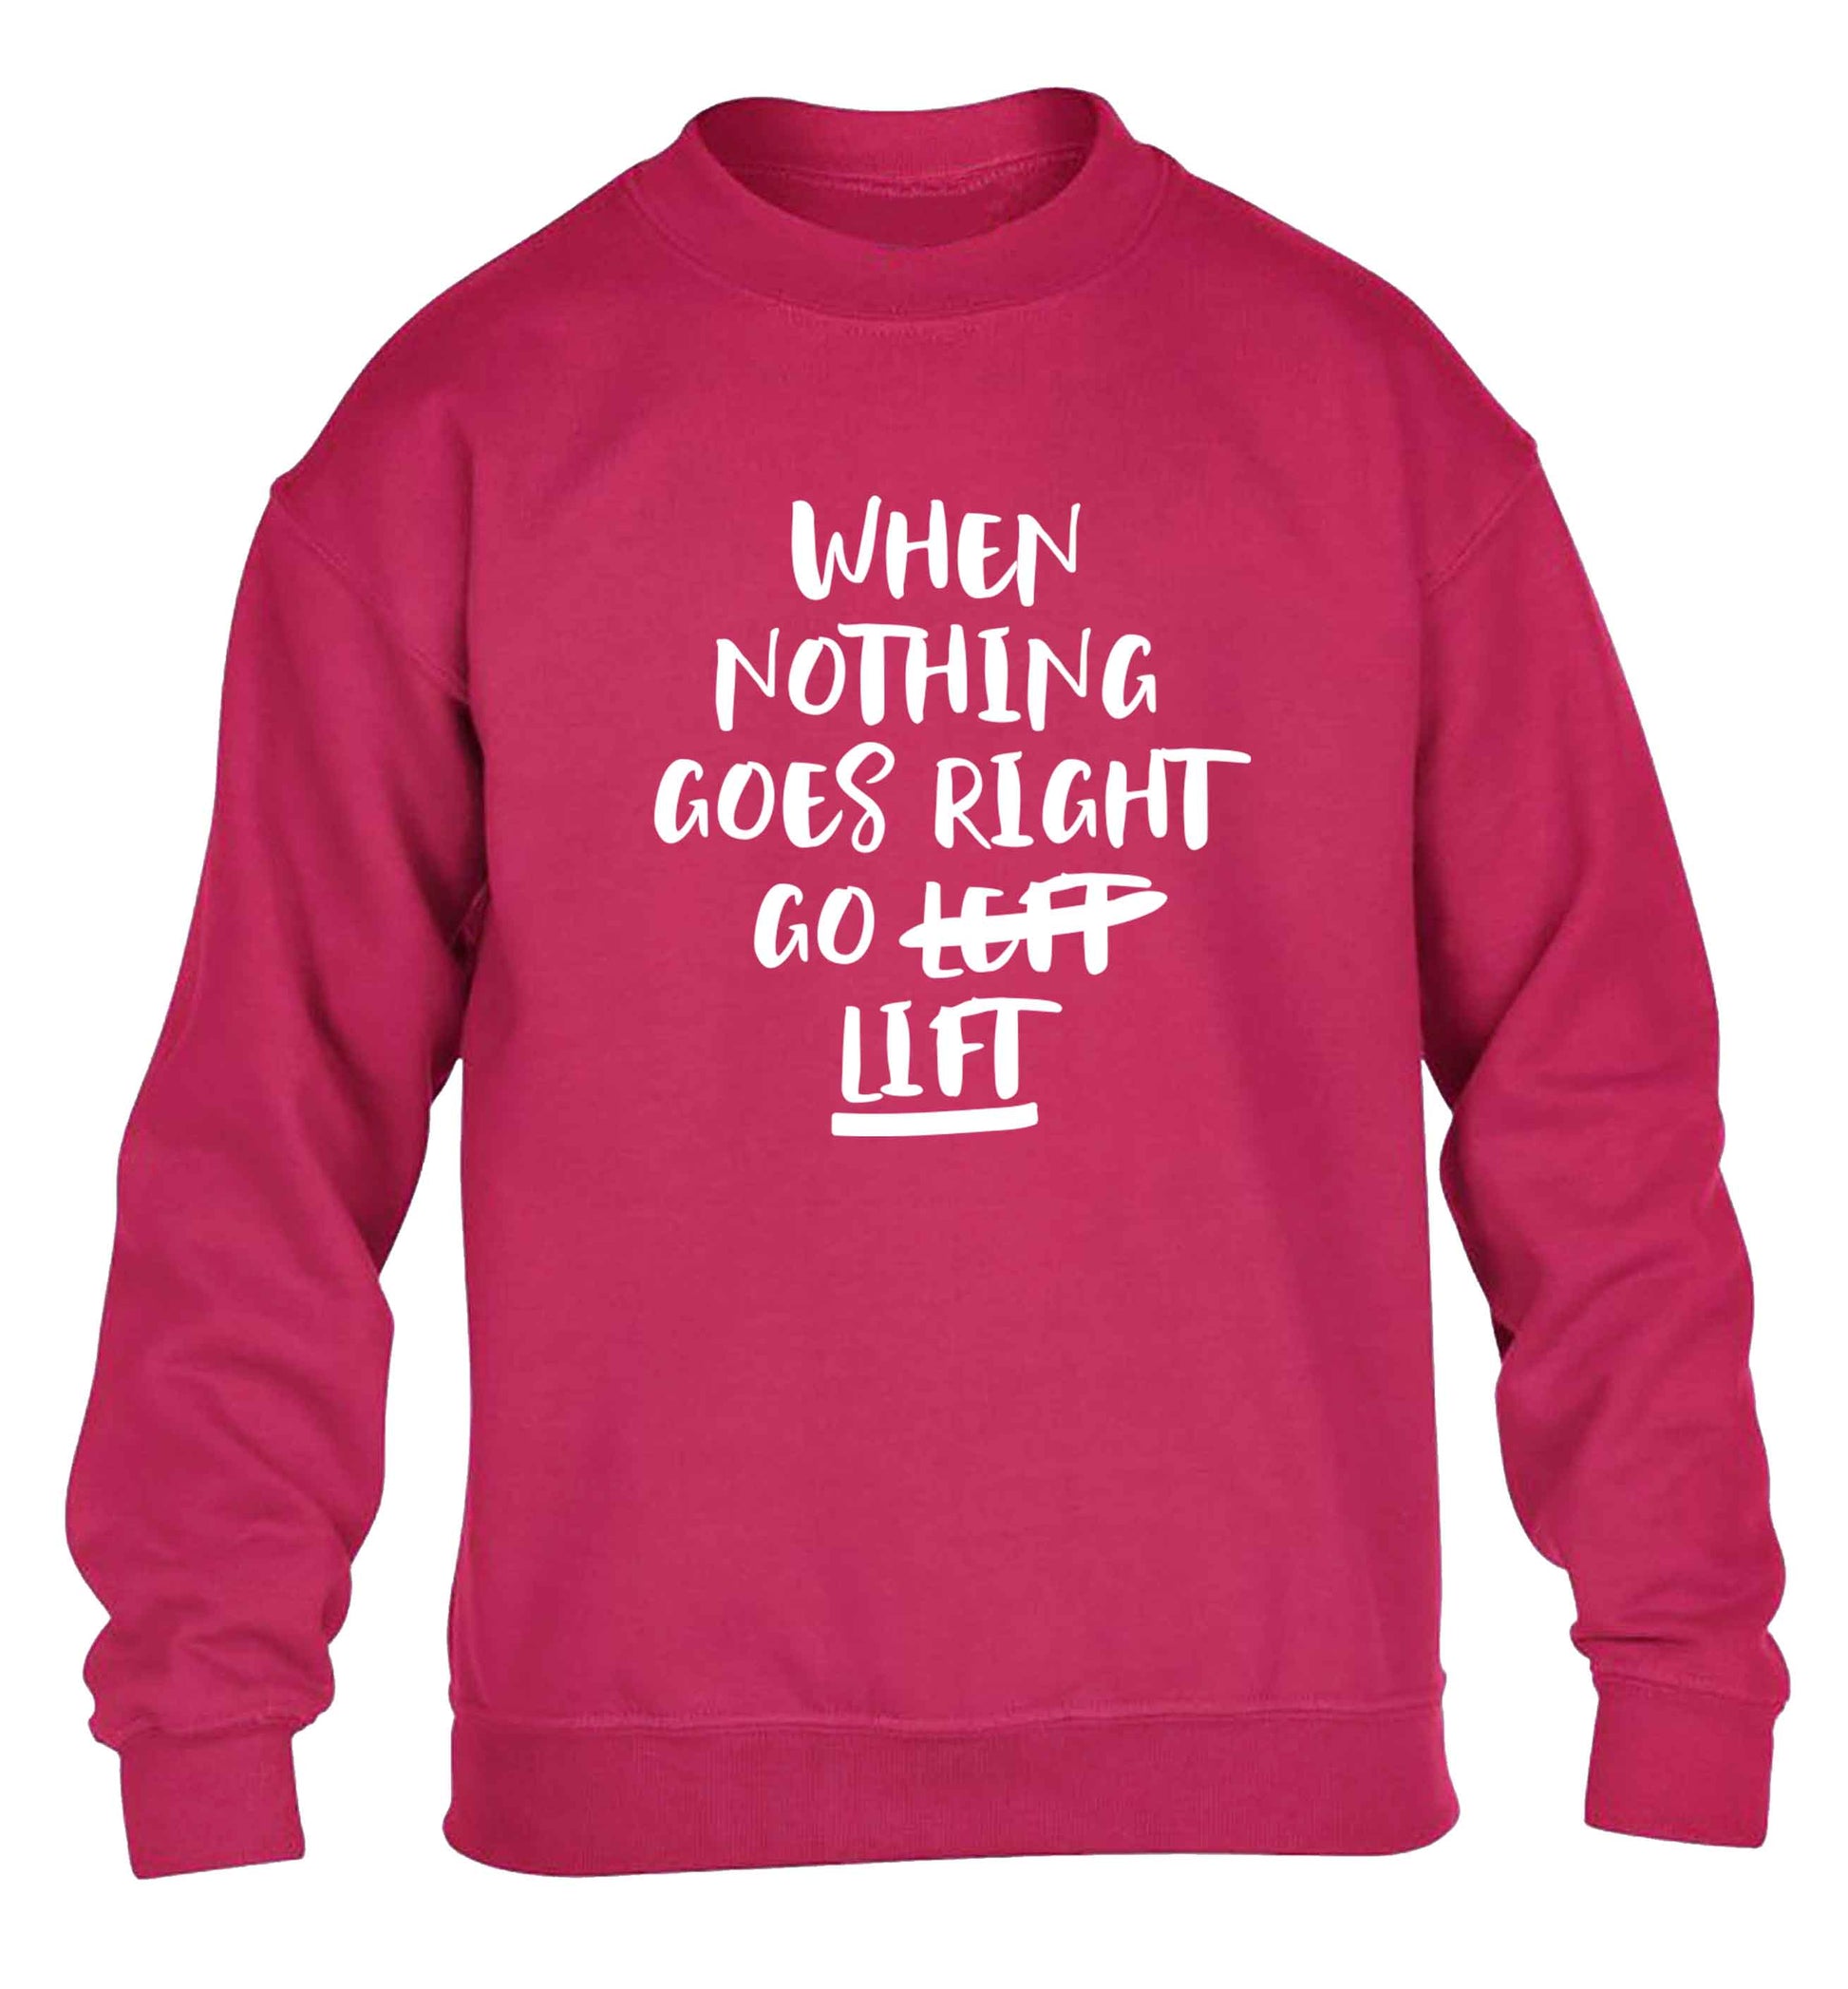 When nothing goes right go lift children's pink sweater 12-13 Years